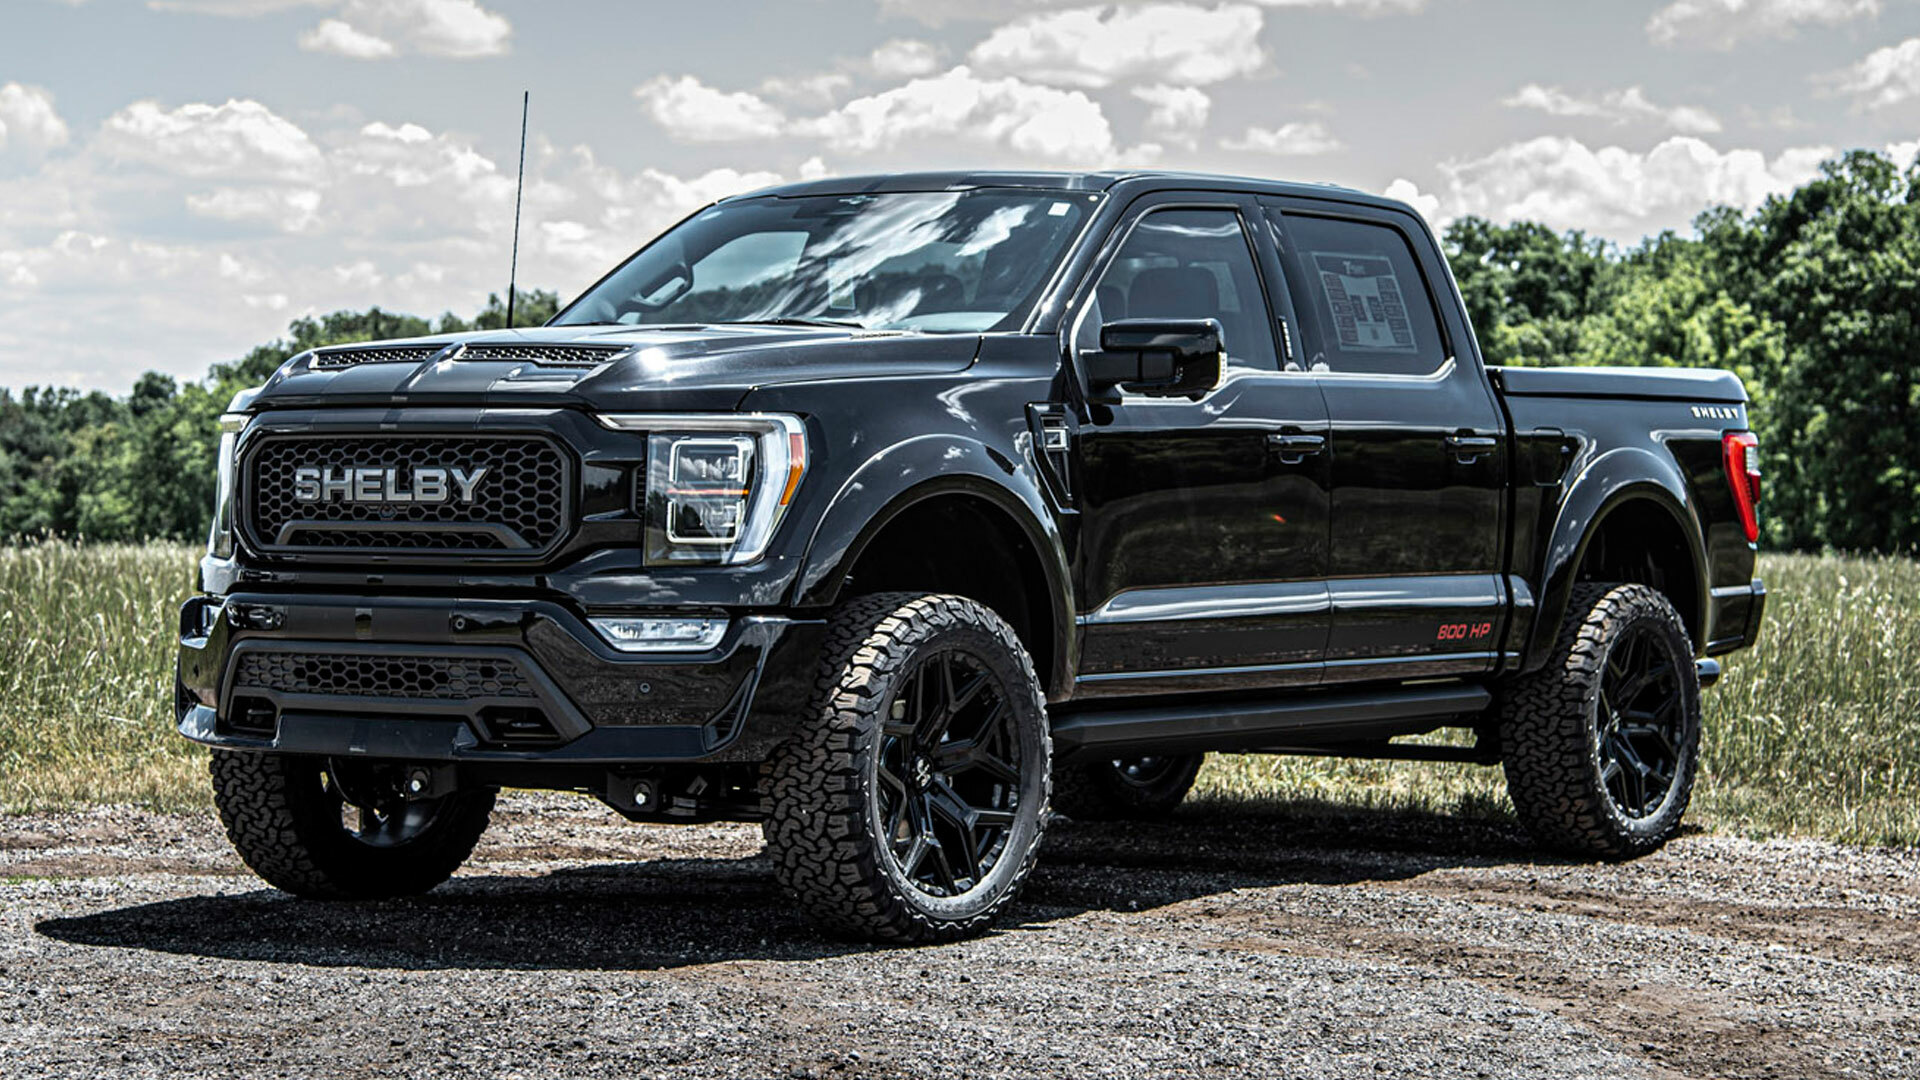 Shelby’s F150 Centennial Edition Is A SixFigure Truck With Up To 800